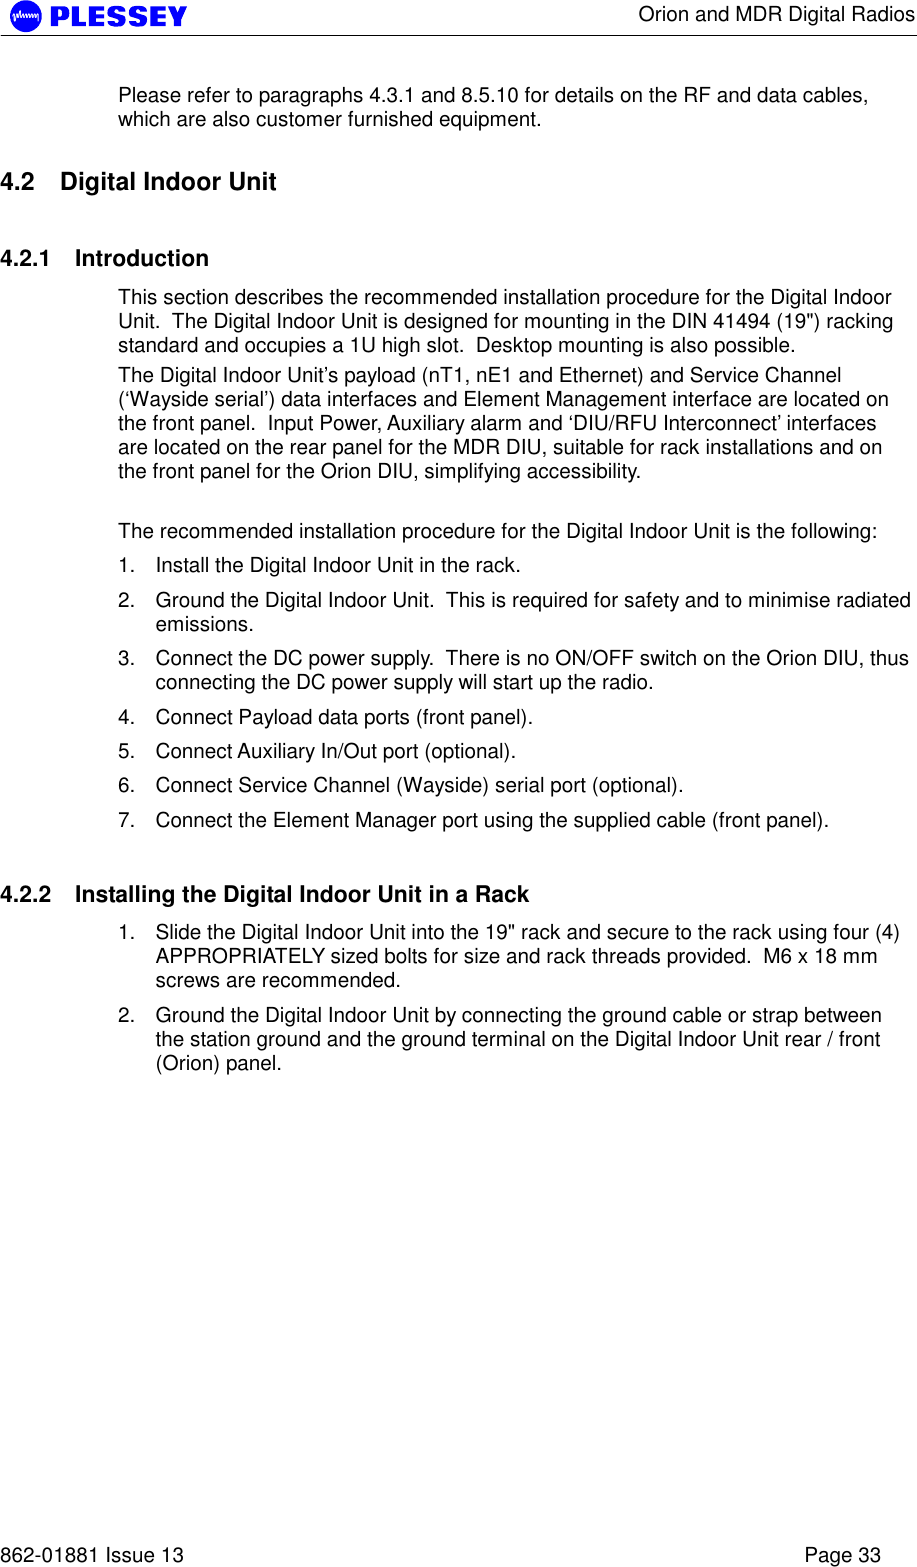      Orion and MDR Digital Radios   862-01881 Issue 13    Page 33 Please refer to paragraphs 4.3.1 and 8.5.10 for details on the RF and data cables, which are also customer furnished equipment.  4.2  Digital Indoor Unit 4.2.1 Introduction This section describes the recommended installation procedure for the Digital Indoor Unit.  The Digital Indoor Unit is designed for mounting in the DIN 41494 (19&quot;) racking standard and occupies a 1U high slot.  Desktop mounting is also possible. The Digital Indoor Unit’s payload (nT1, nE1 and Ethernet) and Service Channel (‘Wayside serial’) data interfaces and Element Management interface are located on the front panel.  Input Power, Auxiliary alarm and ‘DIU/RFU Interconnect’ interfaces are located on the rear panel for the MDR DIU, suitable for rack installations and on the front panel for the Orion DIU, simplifying accessibility.    The recommended installation procedure for the Digital Indoor Unit is the following: 1.  Install the Digital Indoor Unit in the rack. 2.  Ground the Digital Indoor Unit.  This is required for safety and to minimise radiated emissions. 3.  Connect the DC power supply.  There is no ON/OFF switch on the Orion DIU, thus connecting the DC power supply will start up the radio. 4.  Connect Payload data ports (front panel). 5.  Connect Auxiliary In/Out port (optional). 6.  Connect Service Channel (Wayside) serial port (optional). 7.  Connect the Element Manager port using the supplied cable (front panel). 4.2.2  Installing the Digital Indoor Unit in a Rack 1.  Slide the Digital Indoor Unit into the 19&quot; rack and secure to the rack using four (4) APPROPRIATELY sized bolts for size and rack threads provided.  M6 x 18 mm screws are recommended. 2.  Ground the Digital Indoor Unit by connecting the ground cable or strap between the station ground and the ground terminal on the Digital Indoor Unit rear / front (Orion) panel.  